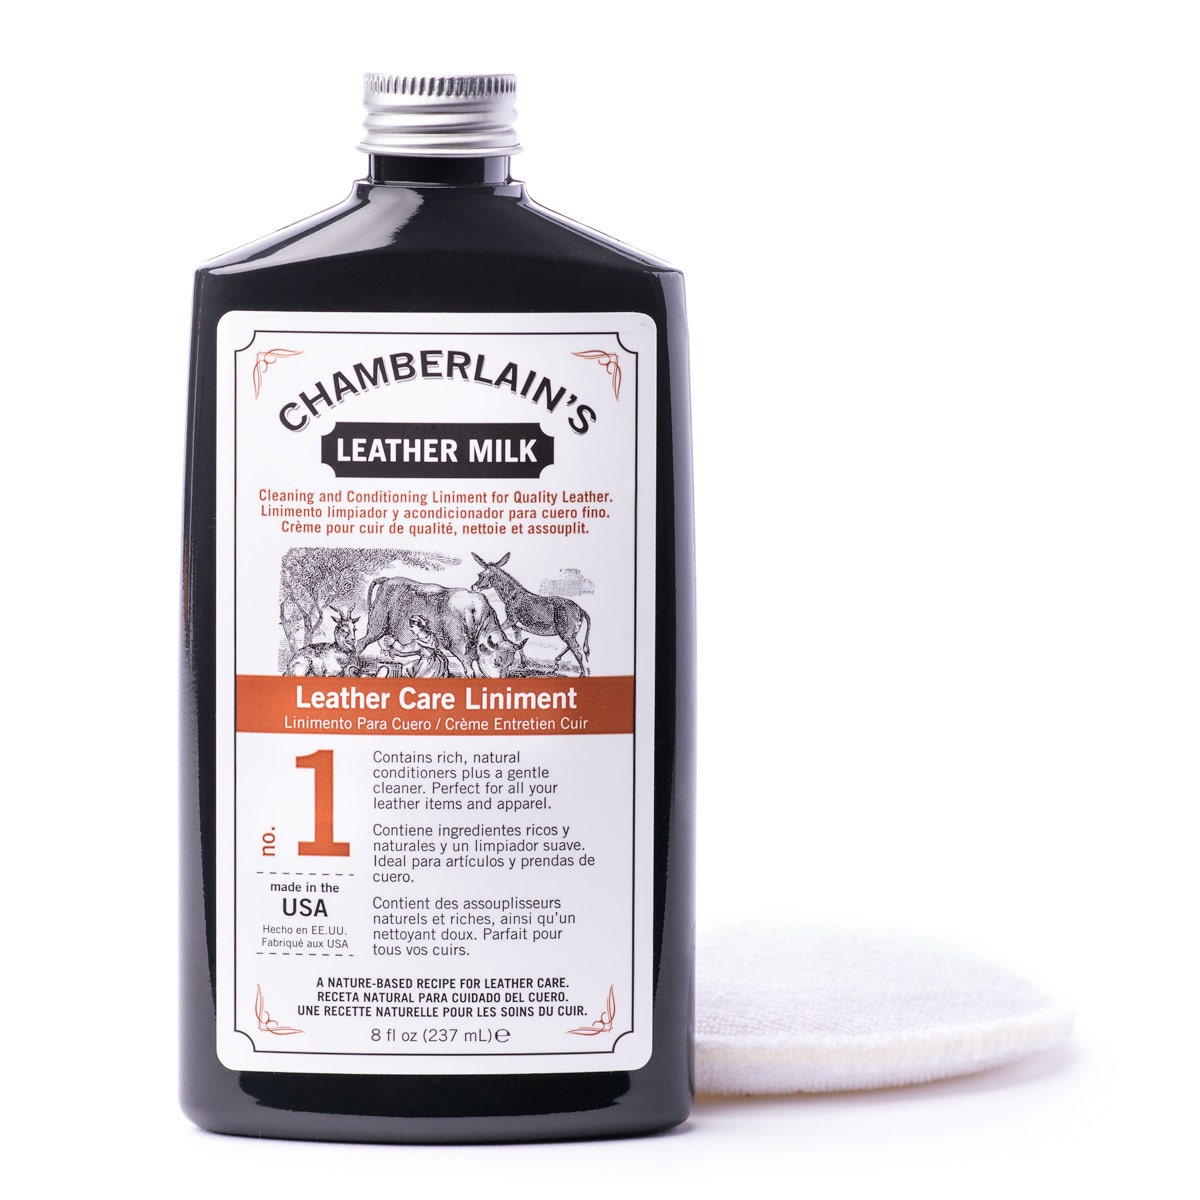 Chamberlain's Leather Milk Leather Care Liniment No. 1: Best Conditioner for Quality Leather. Free Applicator Pad Included. - LeatherMilk